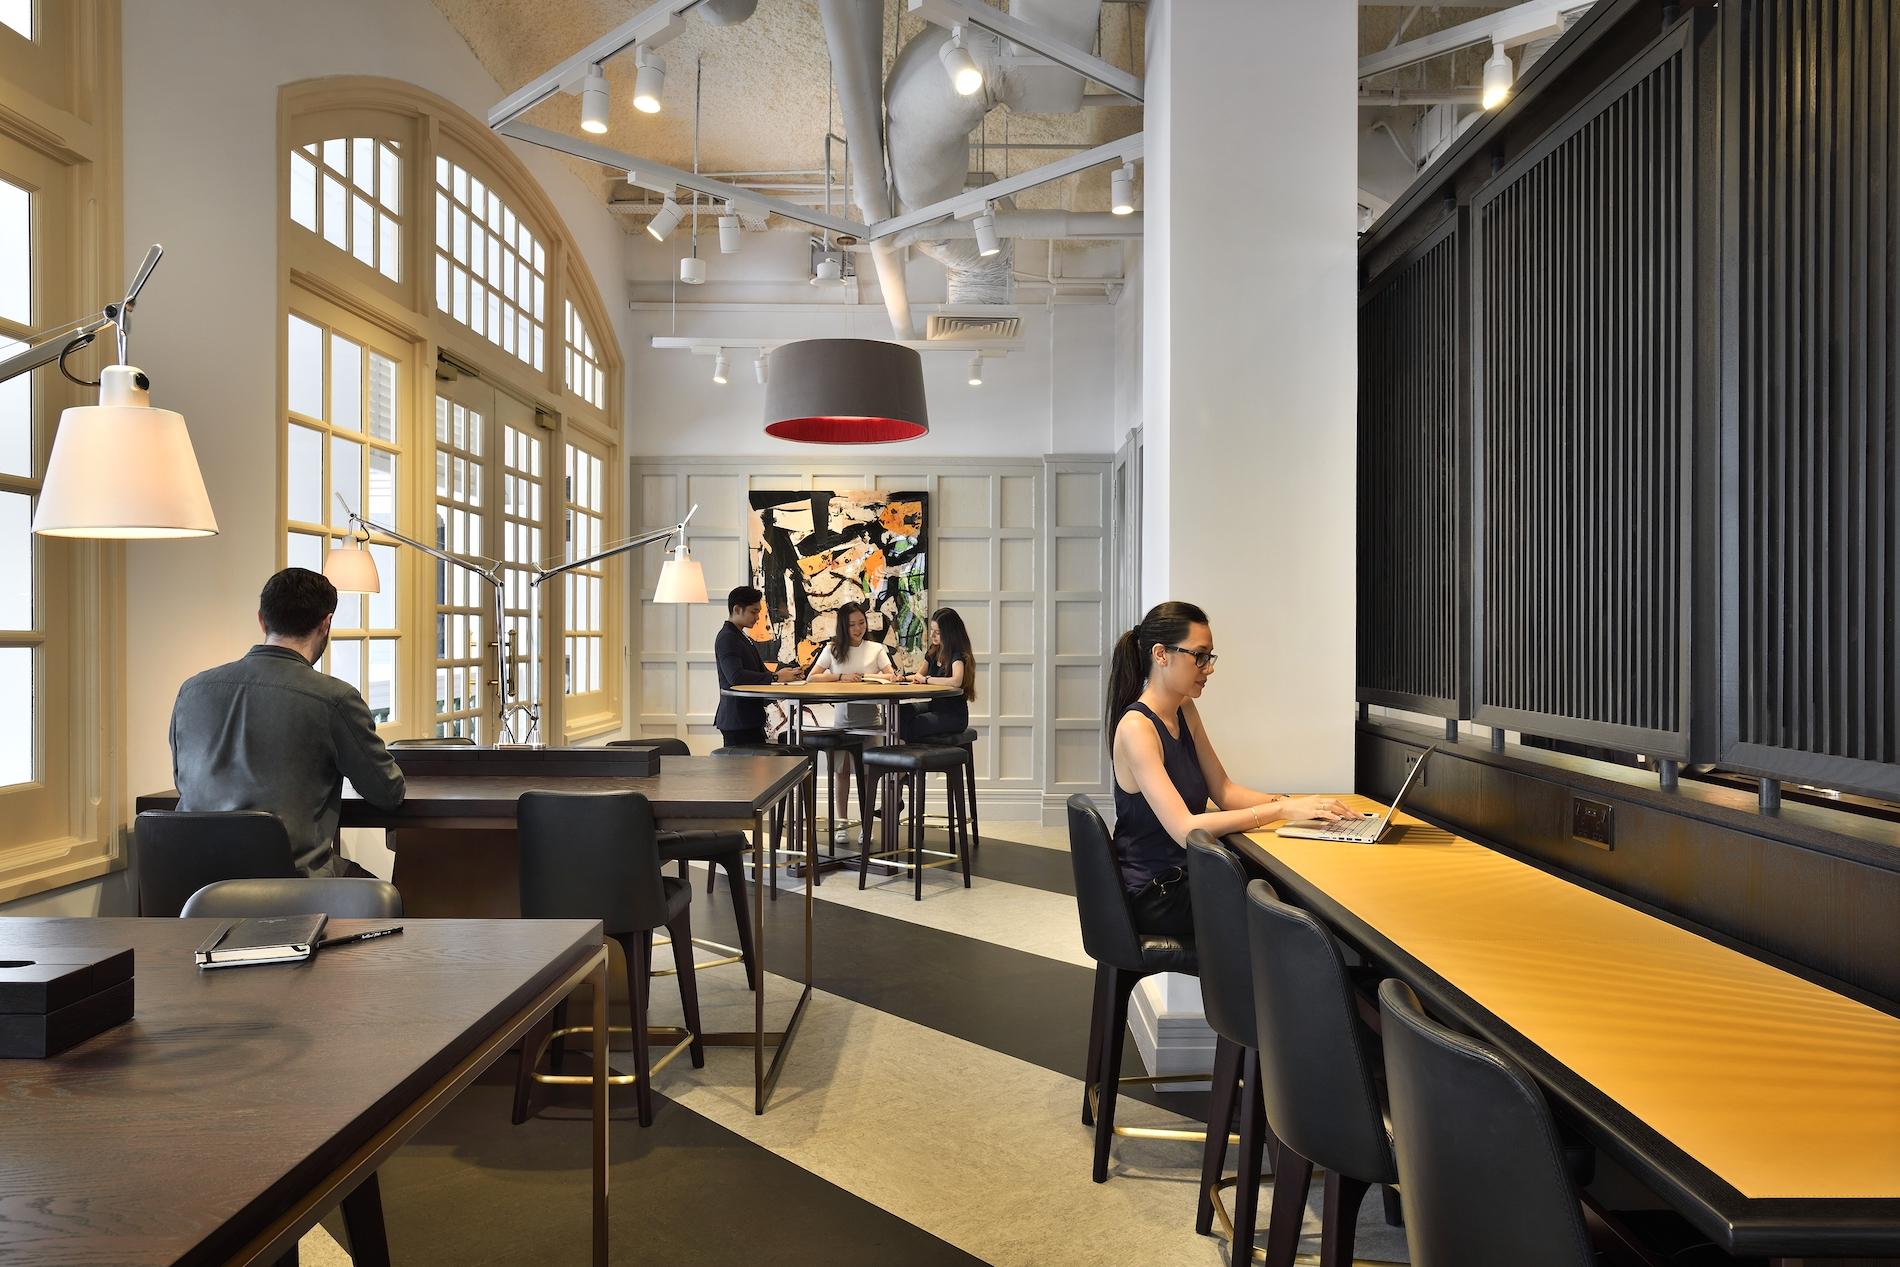 This New Workspace Is Built Inside a Glamorous Heritage Hotel